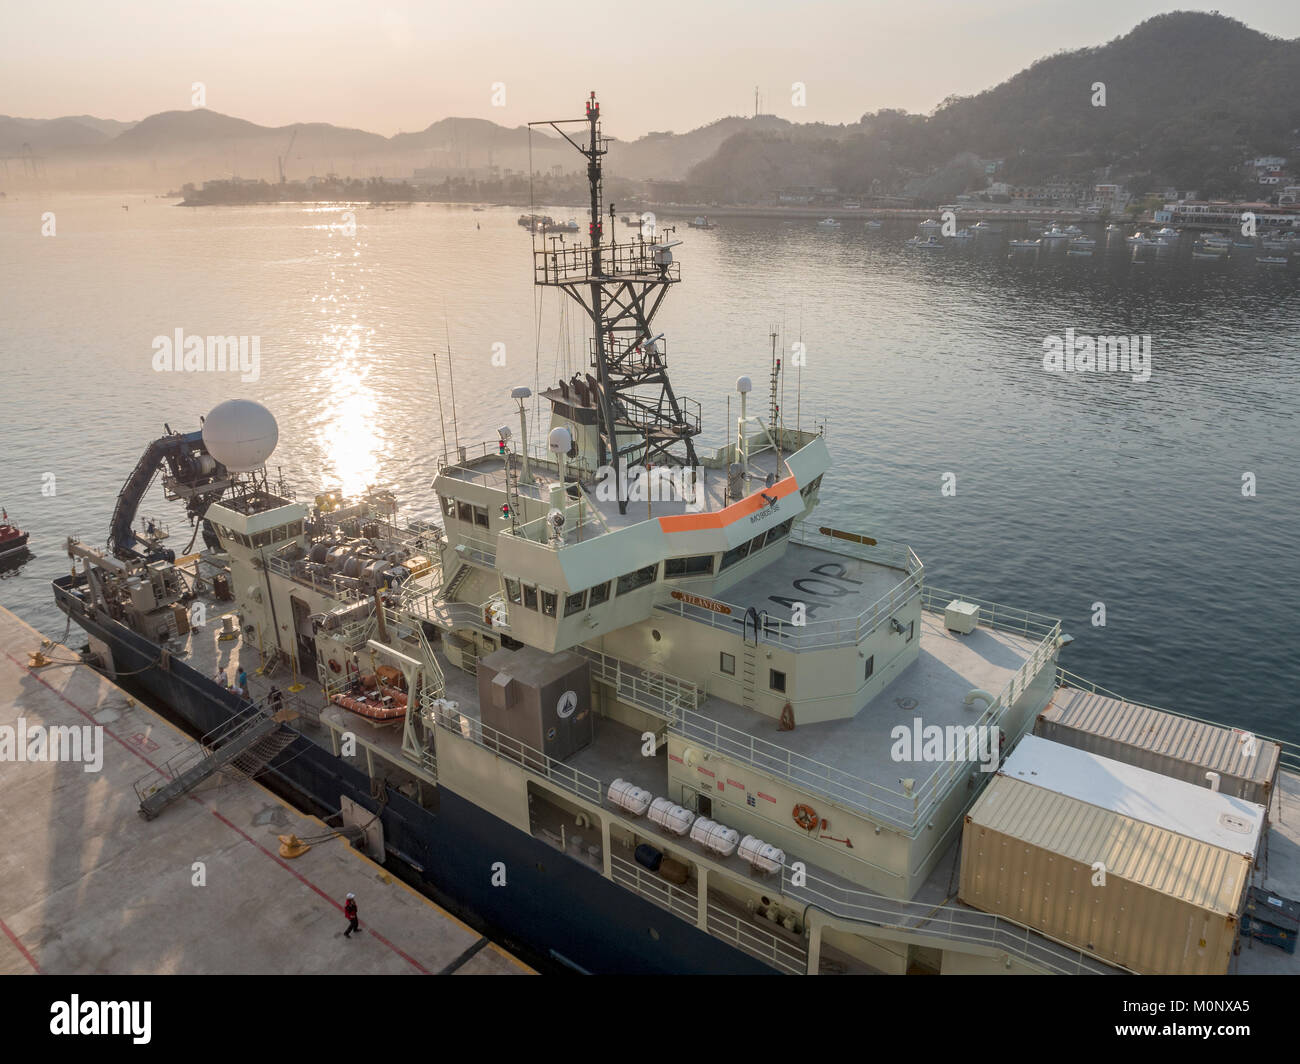 Woods Hole Oceanographic Institute Operates Research Vessel Atlantis Owned By The U.S. Navy In Port At Manzanillo Mexico Stock Photo